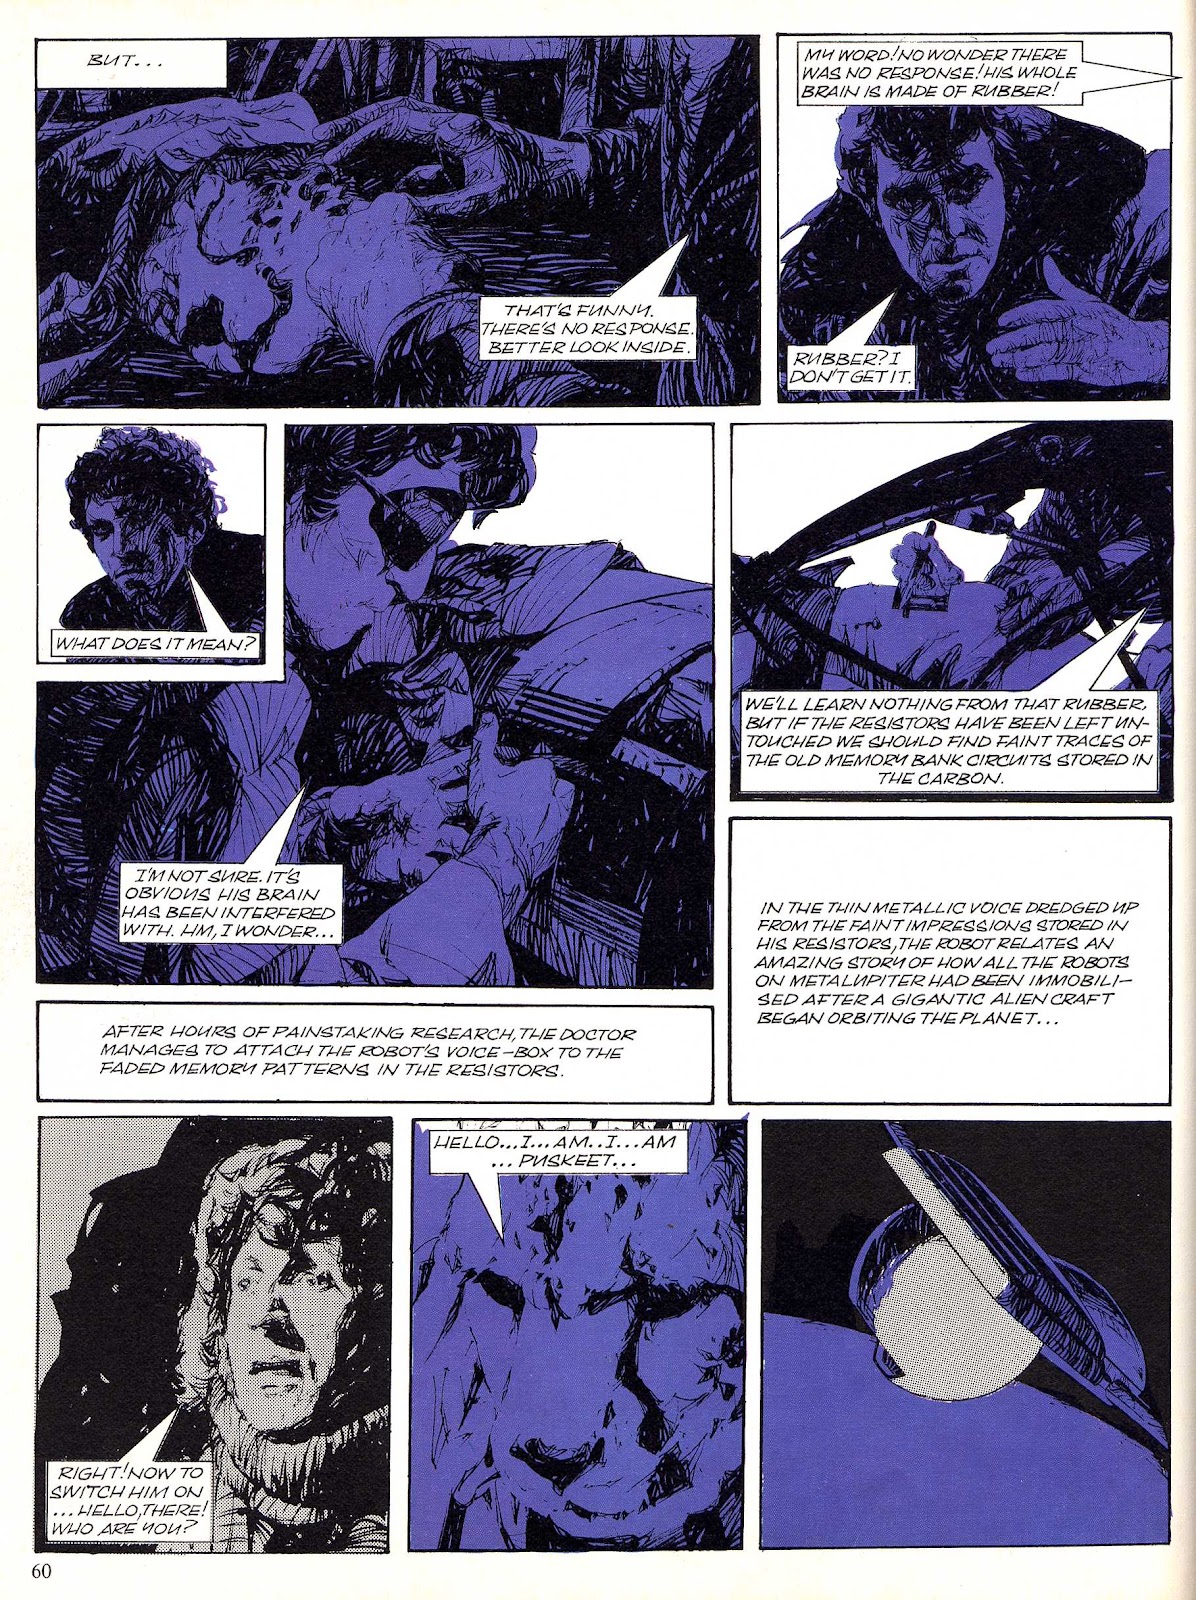 Doctor Who Annual issue 1977 - Page 10